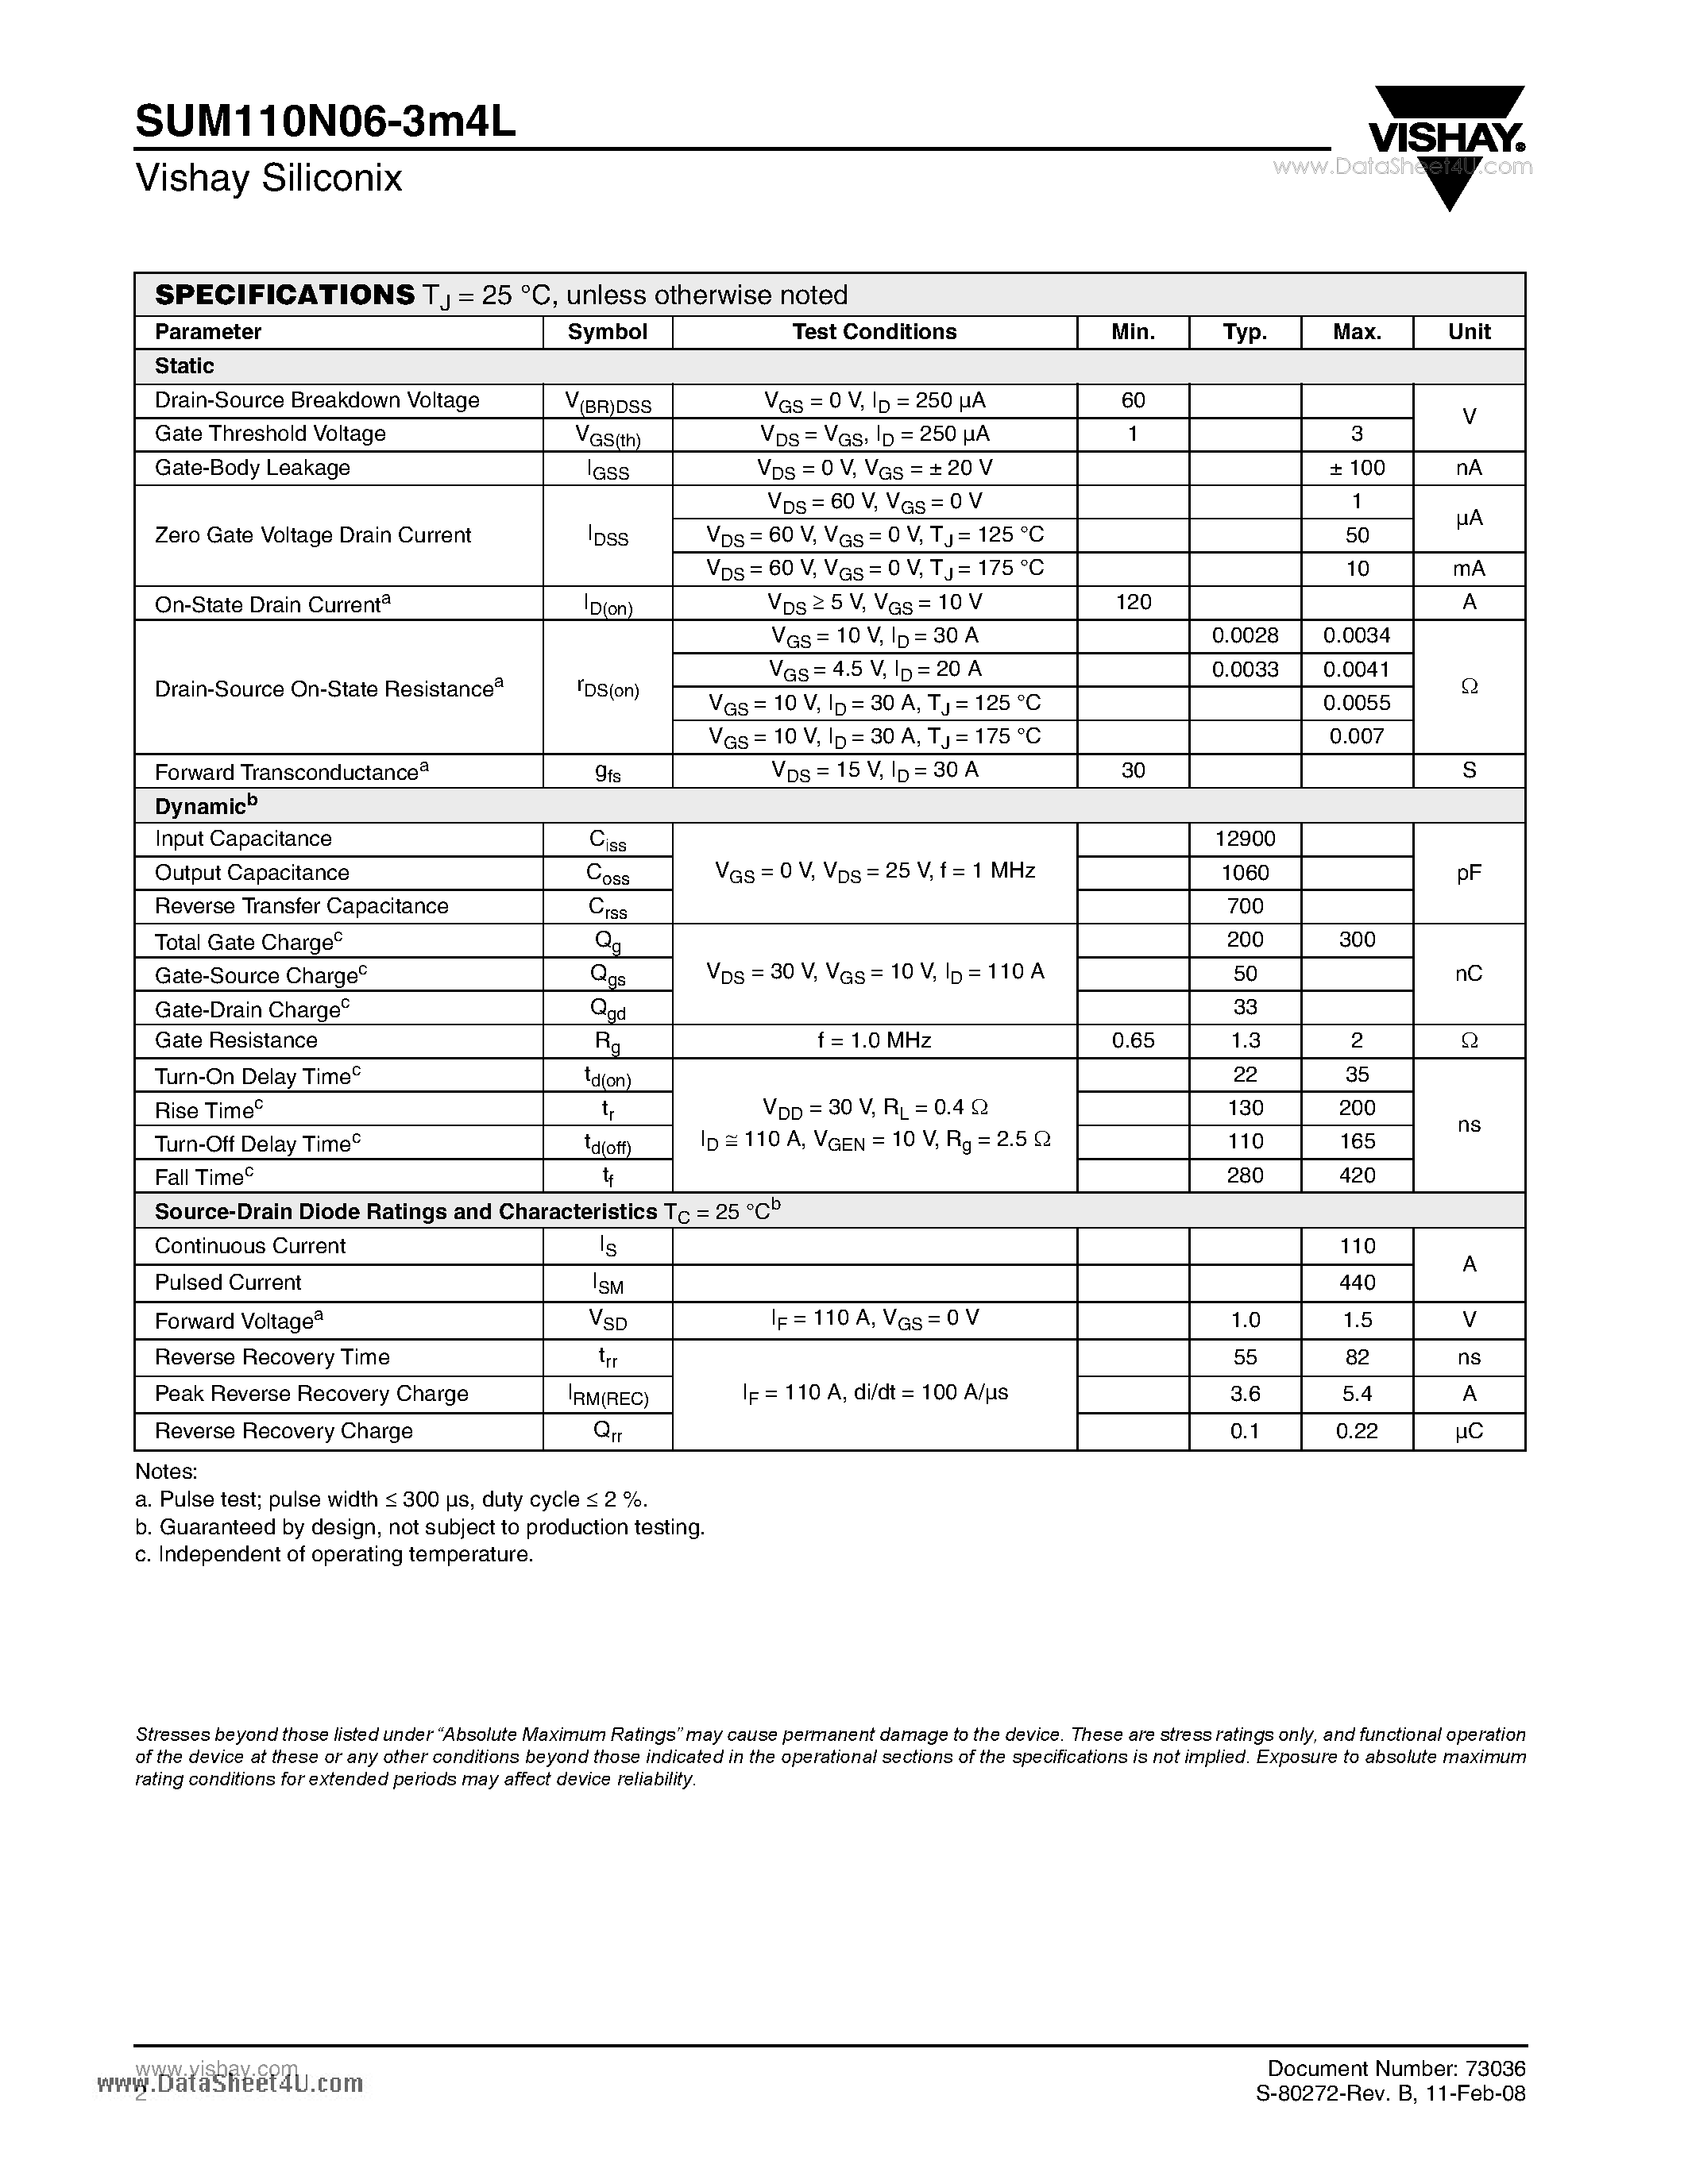 Datasheet SUM110N06-3m4L - N-Channel 60-V (D-S) 175 C MOSFET page 2